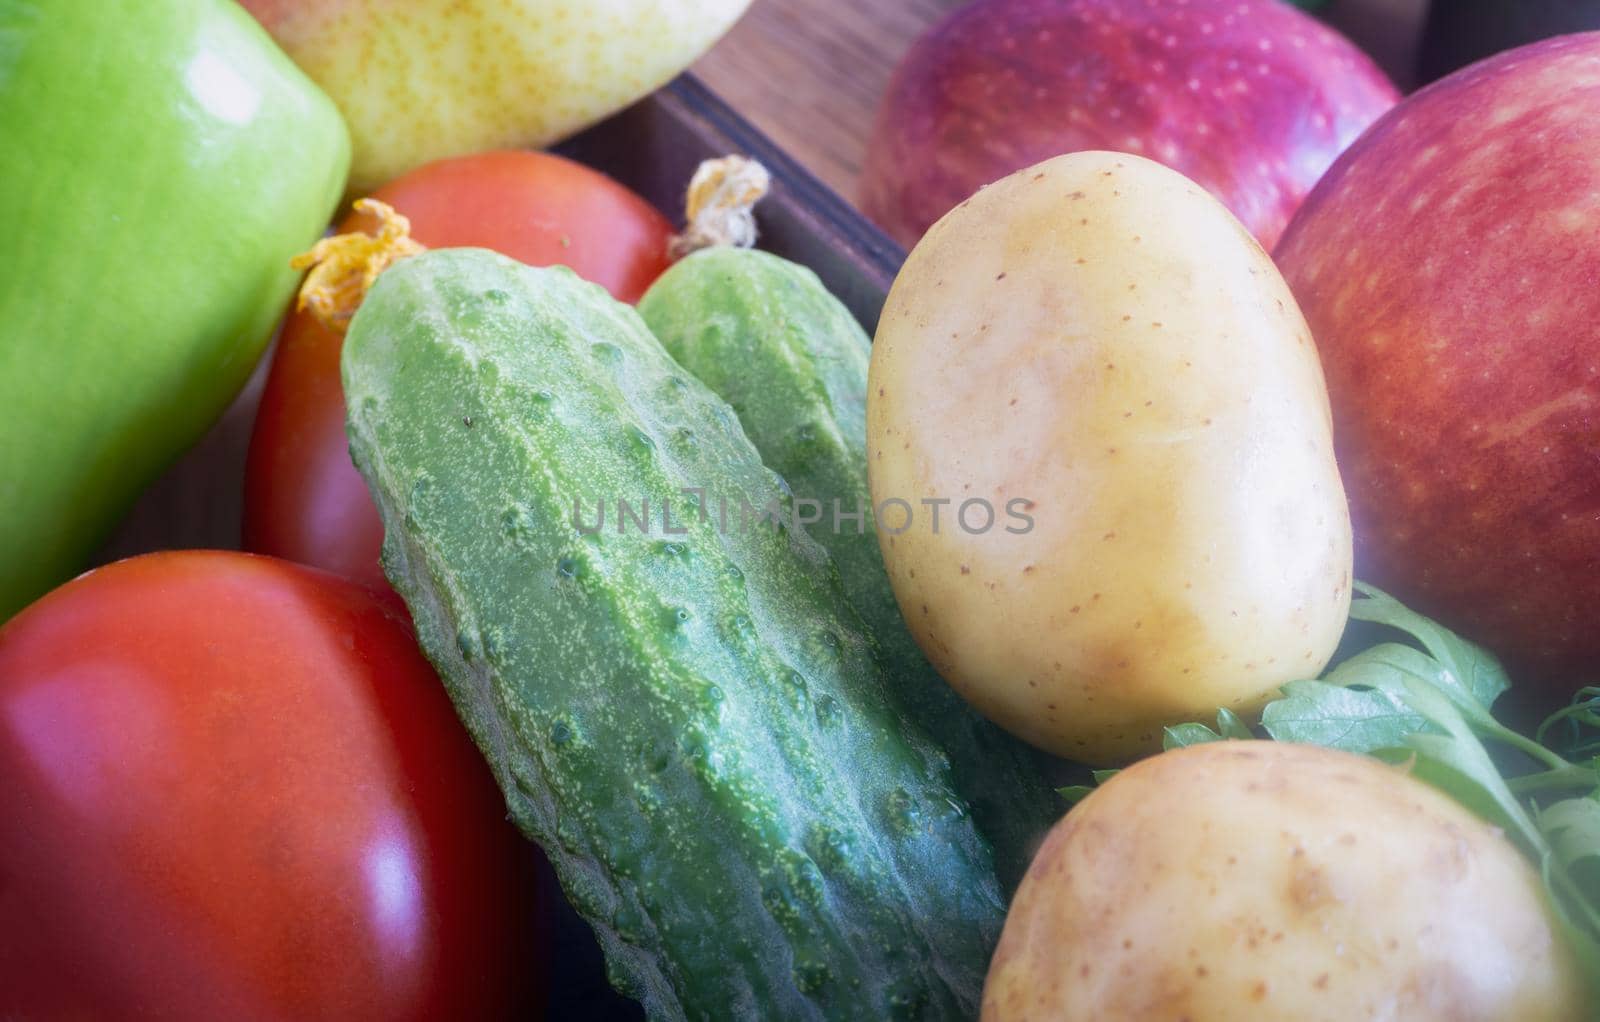 In a small box are cucumbers, tomatoes, apples. Presented in close-up.